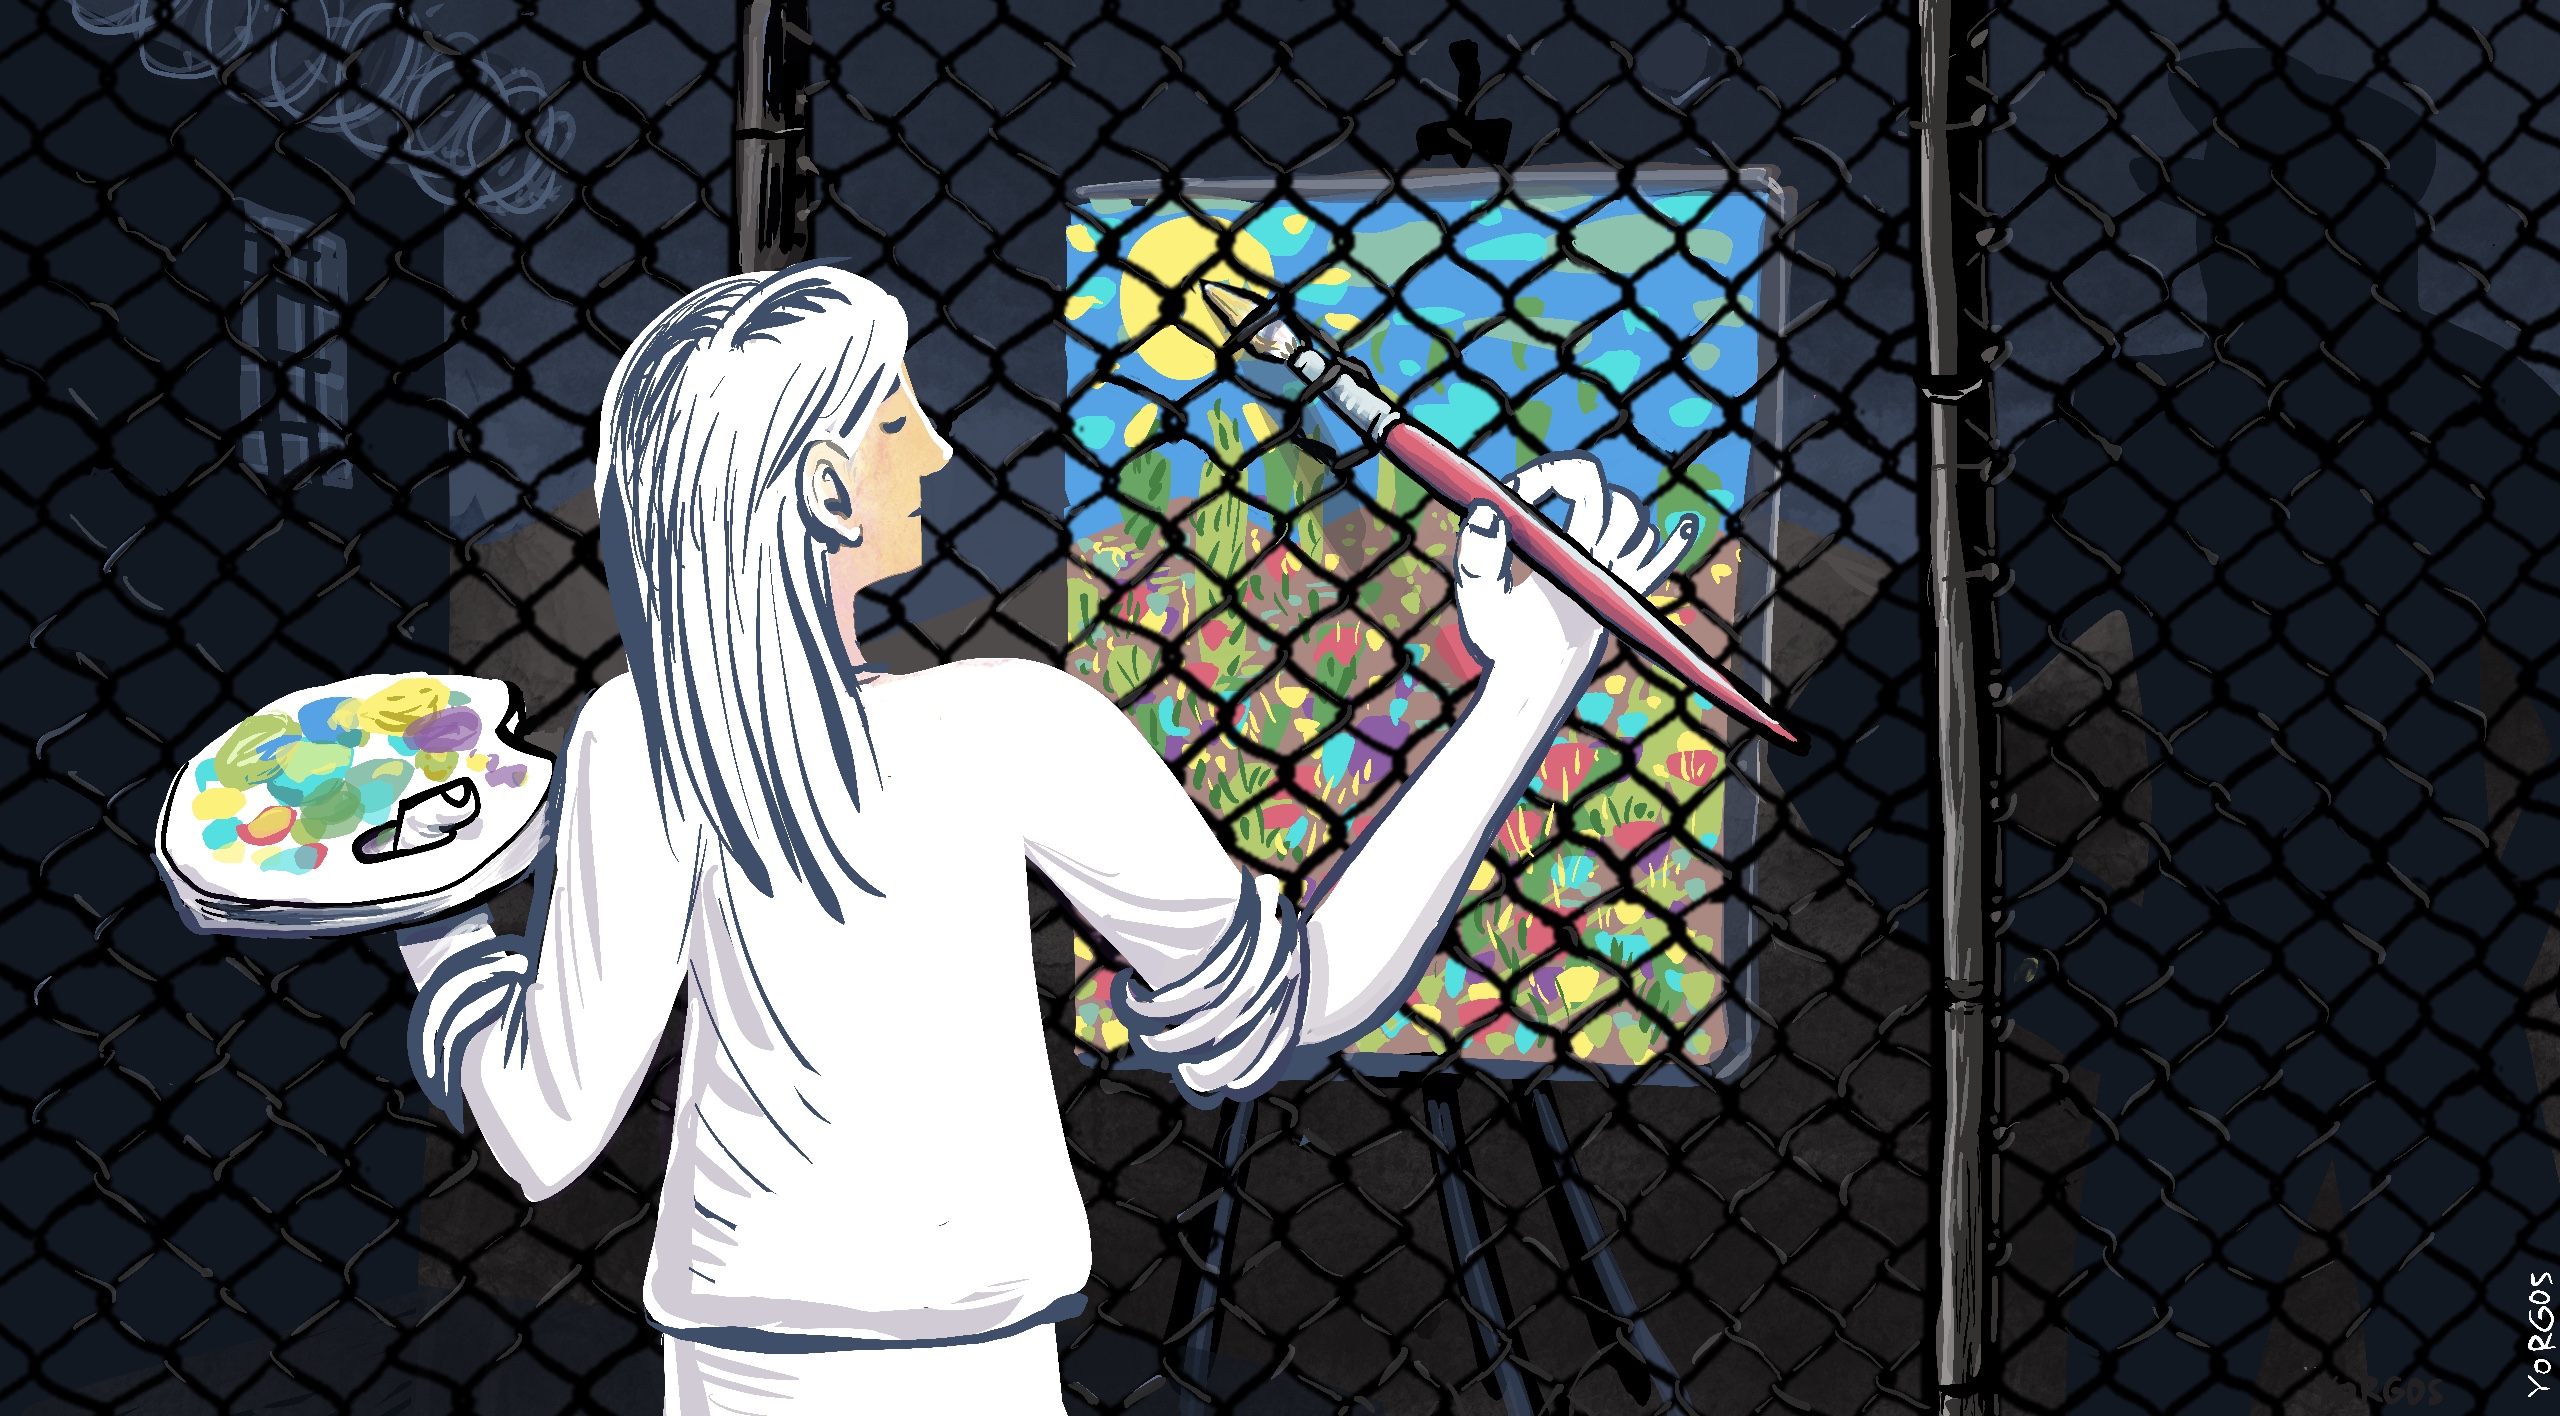 Detained Davincis: Artists in Lithuania draw attention to the plight of asylum-seekers